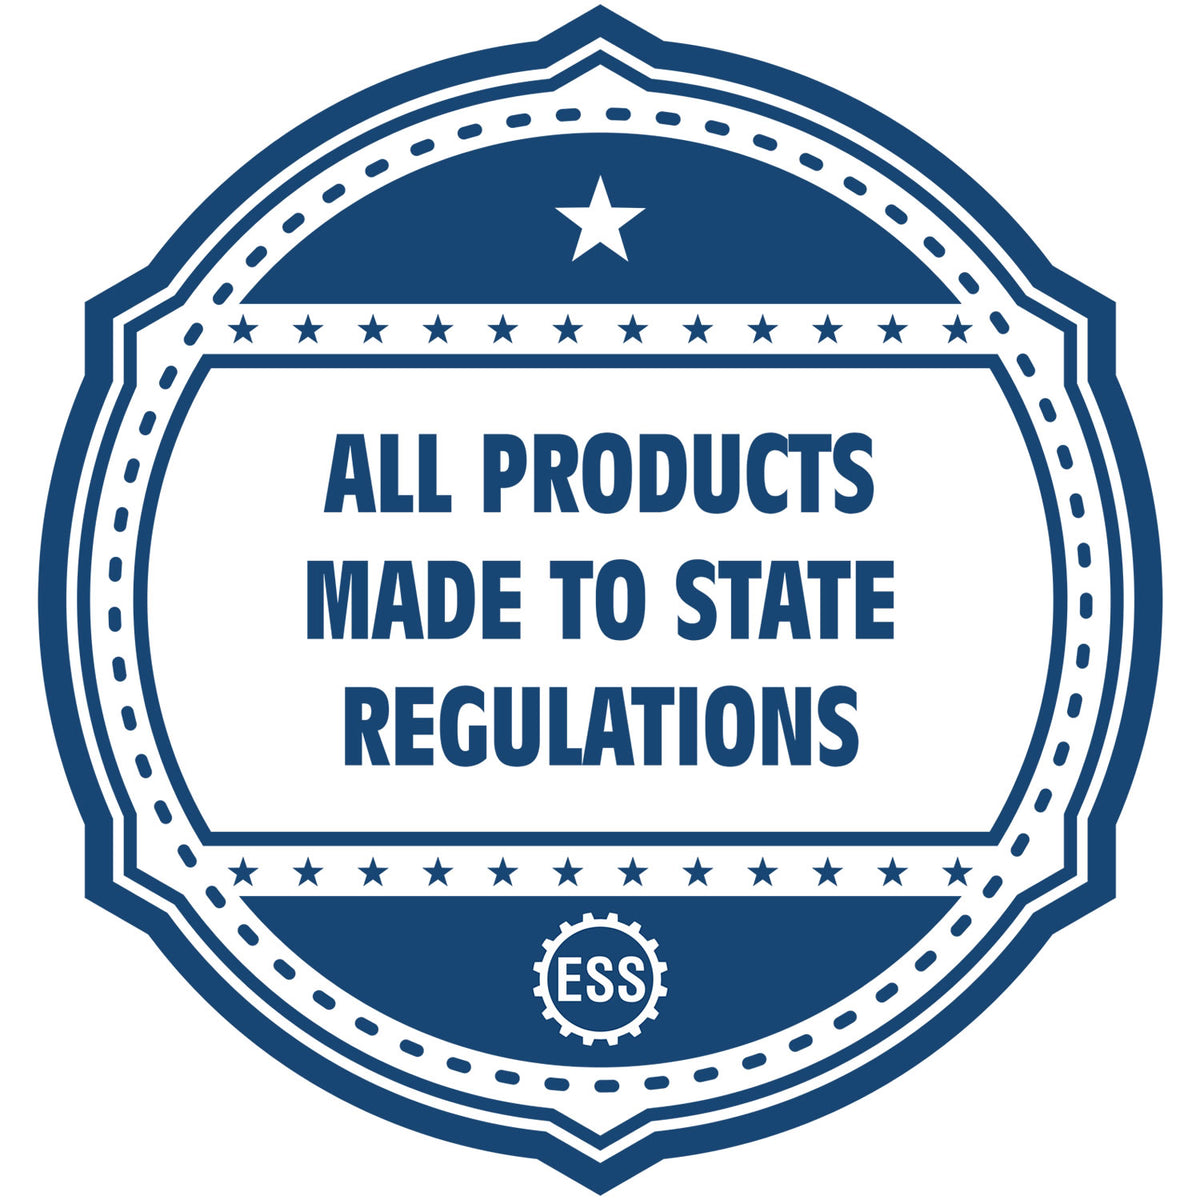 An icon or badge element for the Long Reach Florida PE Seal showing that this product is made in compliance with state regulations.